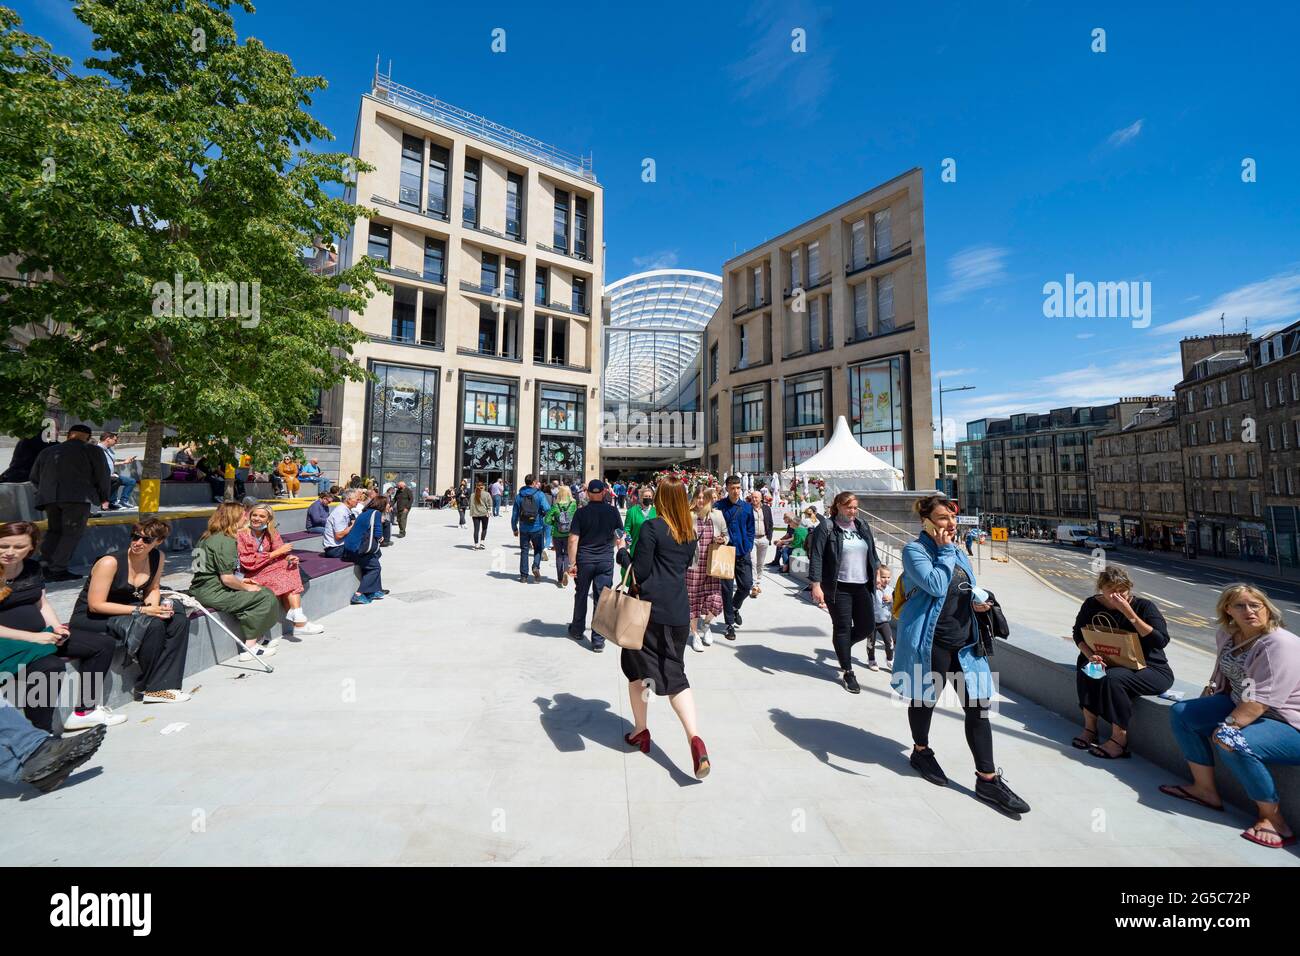 Edinburgh, Scotland, UK. 24 June 2021. First images of the new St James Quarter which opened this morning in Edinburgh. The large retail and residenti Stock Photo